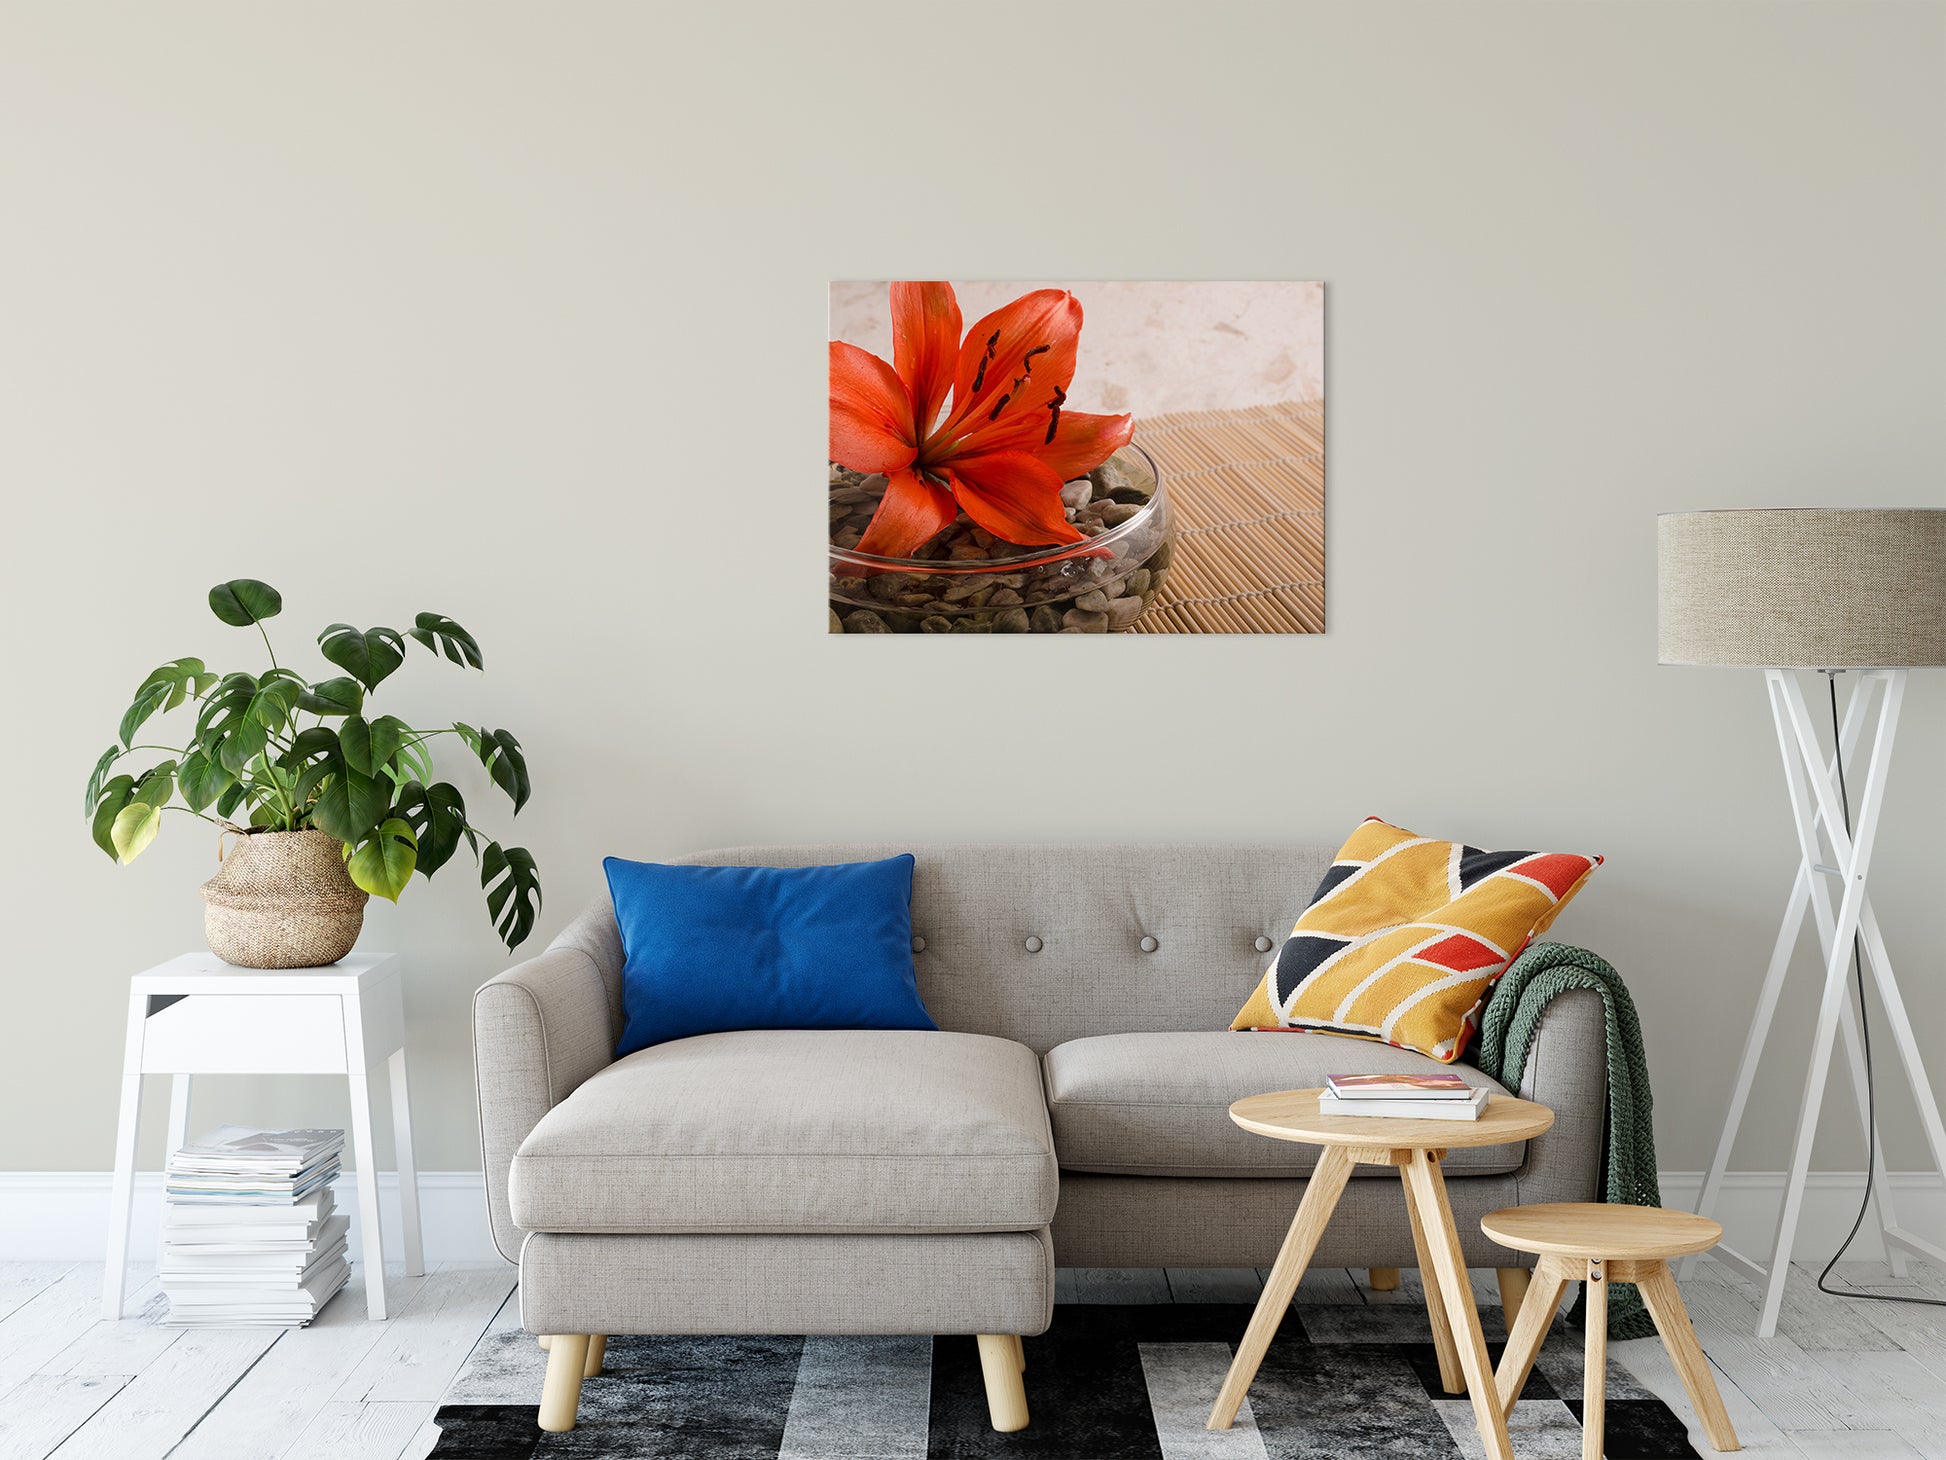 Tranquil Lily Nature / Floral Photo Fine Art Canvas Wall Art Prints 24" x 36" - PIPAFINEART